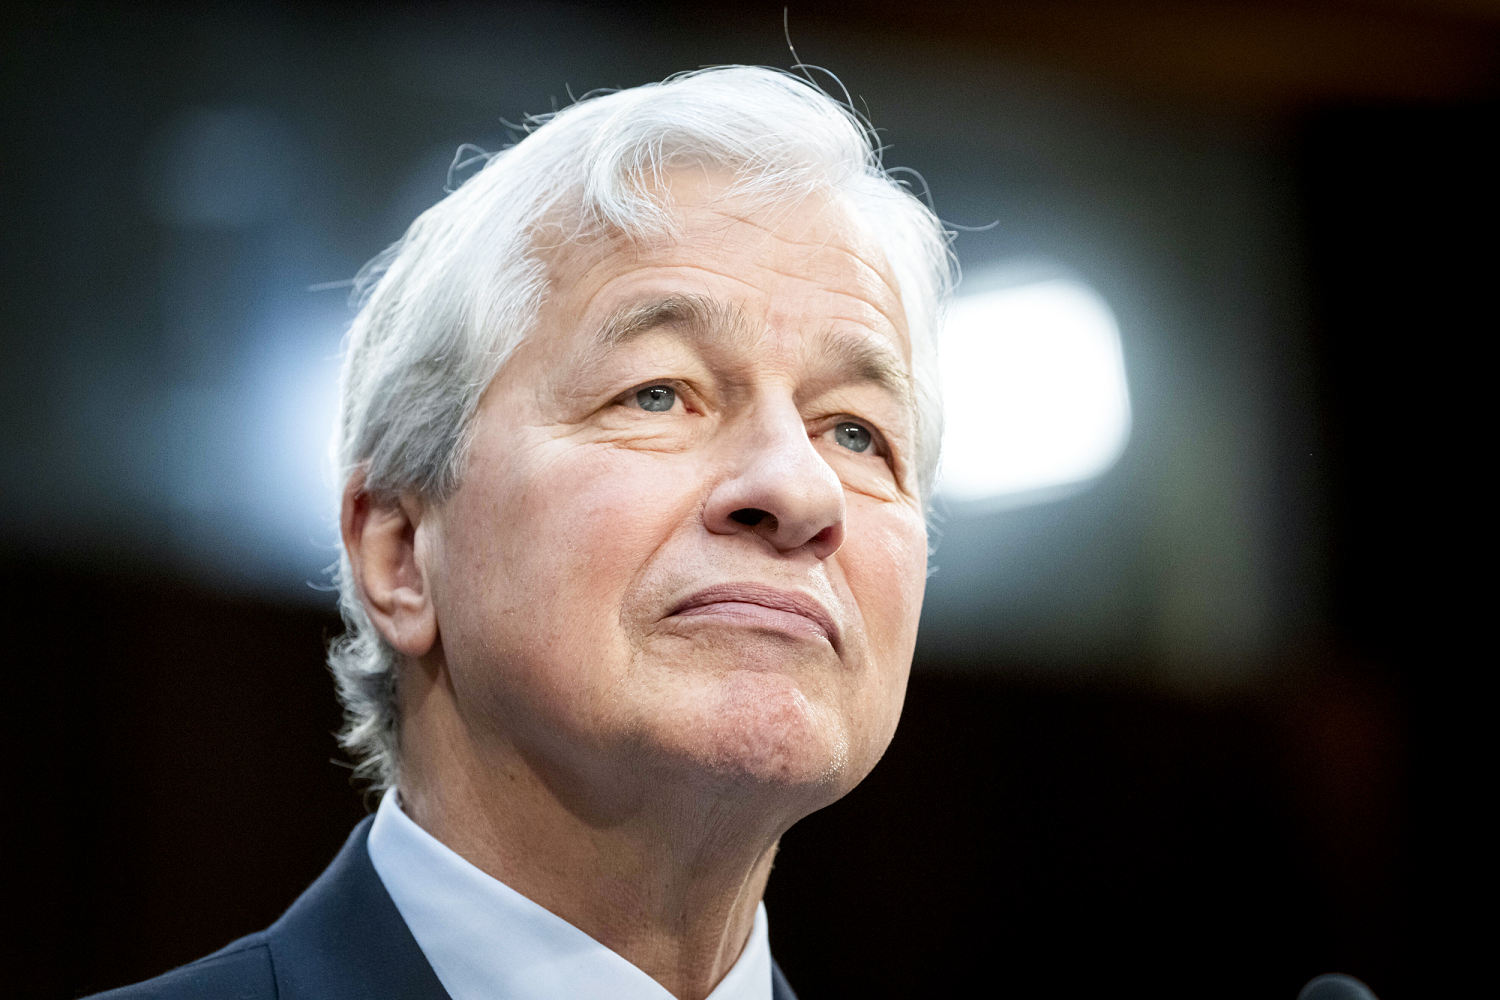 JPMorgan CEO Jamie Dimon hopes for soft landing for U.S. economy but says stagflation is possible